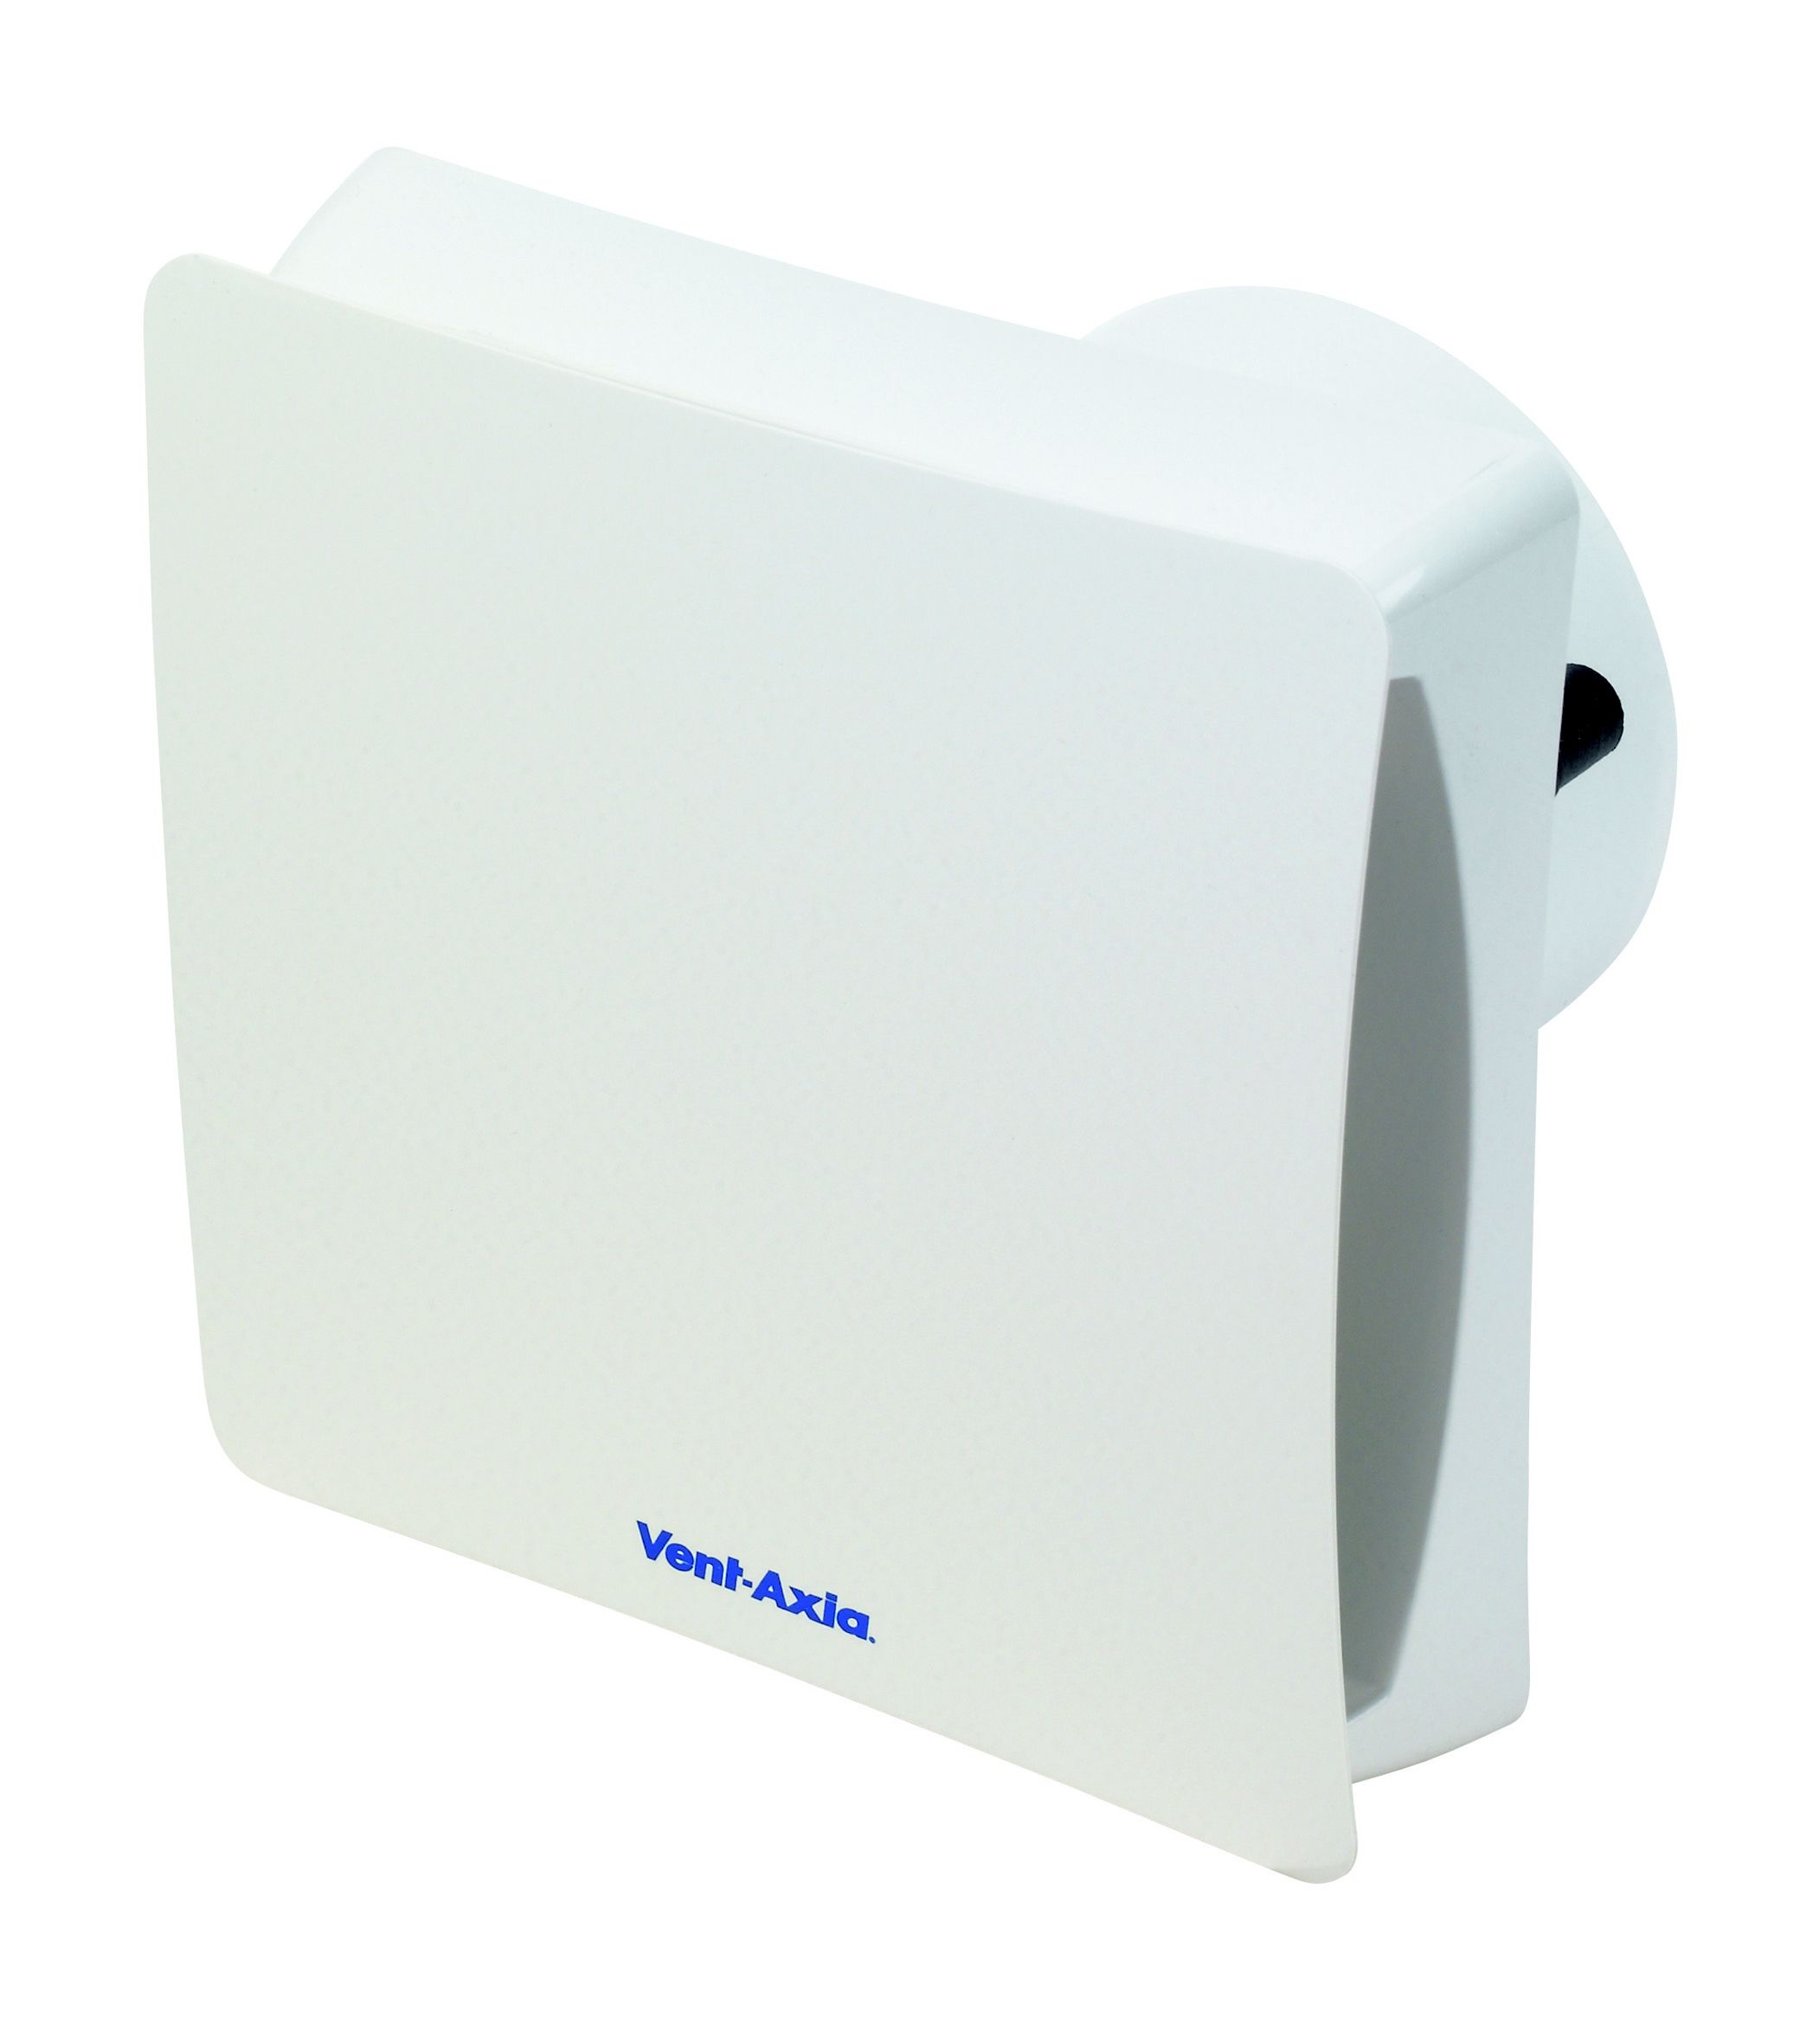 Vent-Axia Basic Silent 100B Extractor fan